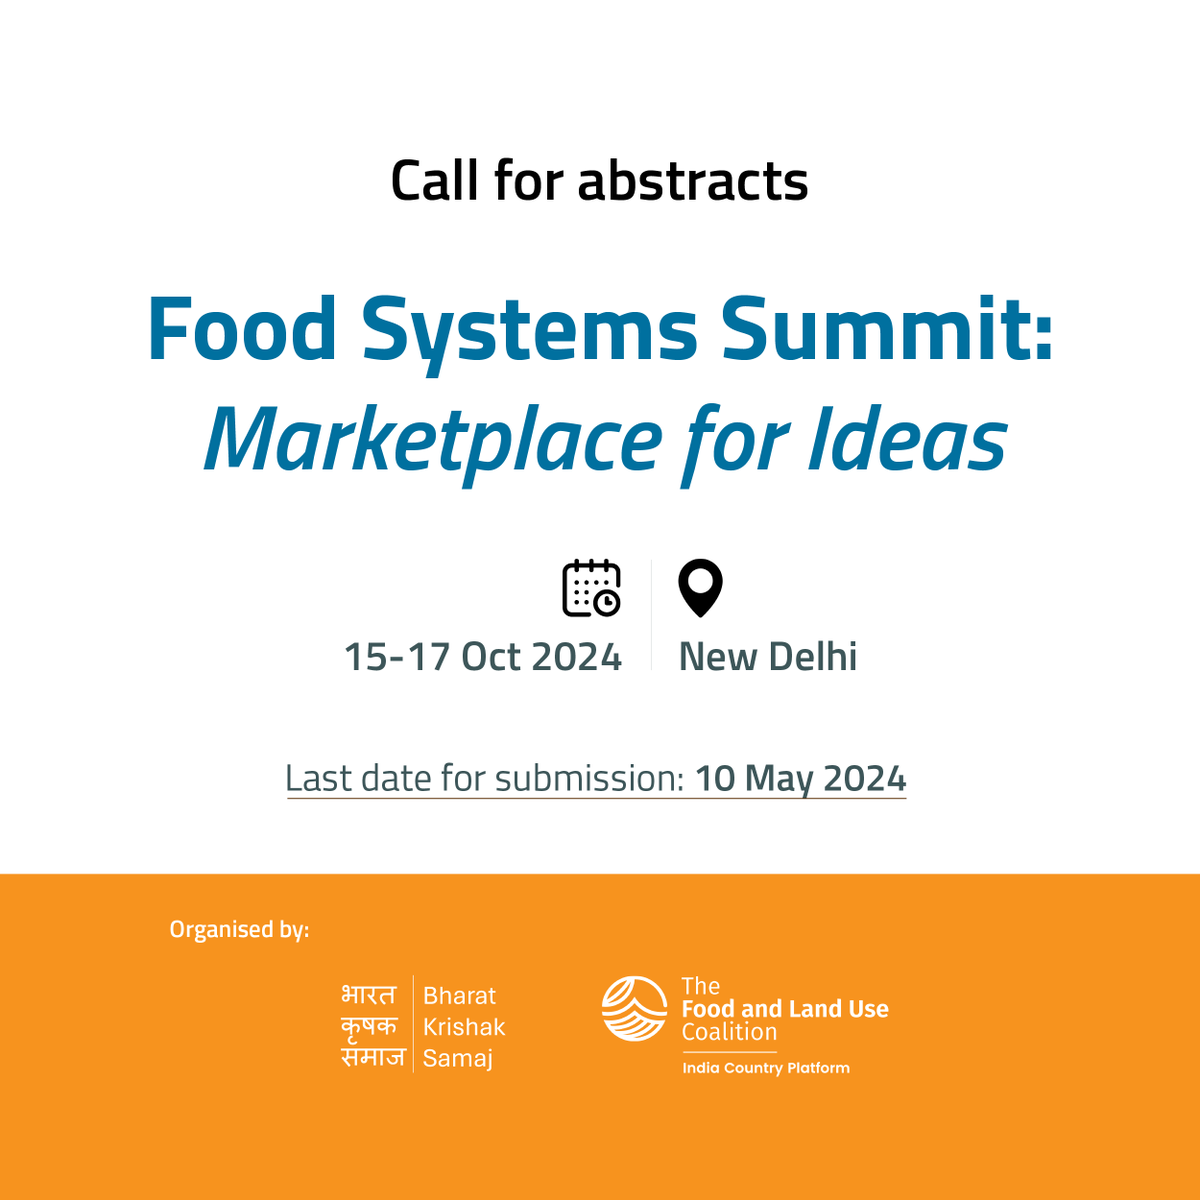 📣 We’re inviting abstracts 📄 for presentation at the inaugural edition of ‘Food Systems Summit: Marketplace for Ideas’ 2024. Follow the link for more details on this: 👉bit.ly/FSH_Details Submit your abstracts here: 👉bit.ly/FSH_Form 🔴Last date: 10th May 2024